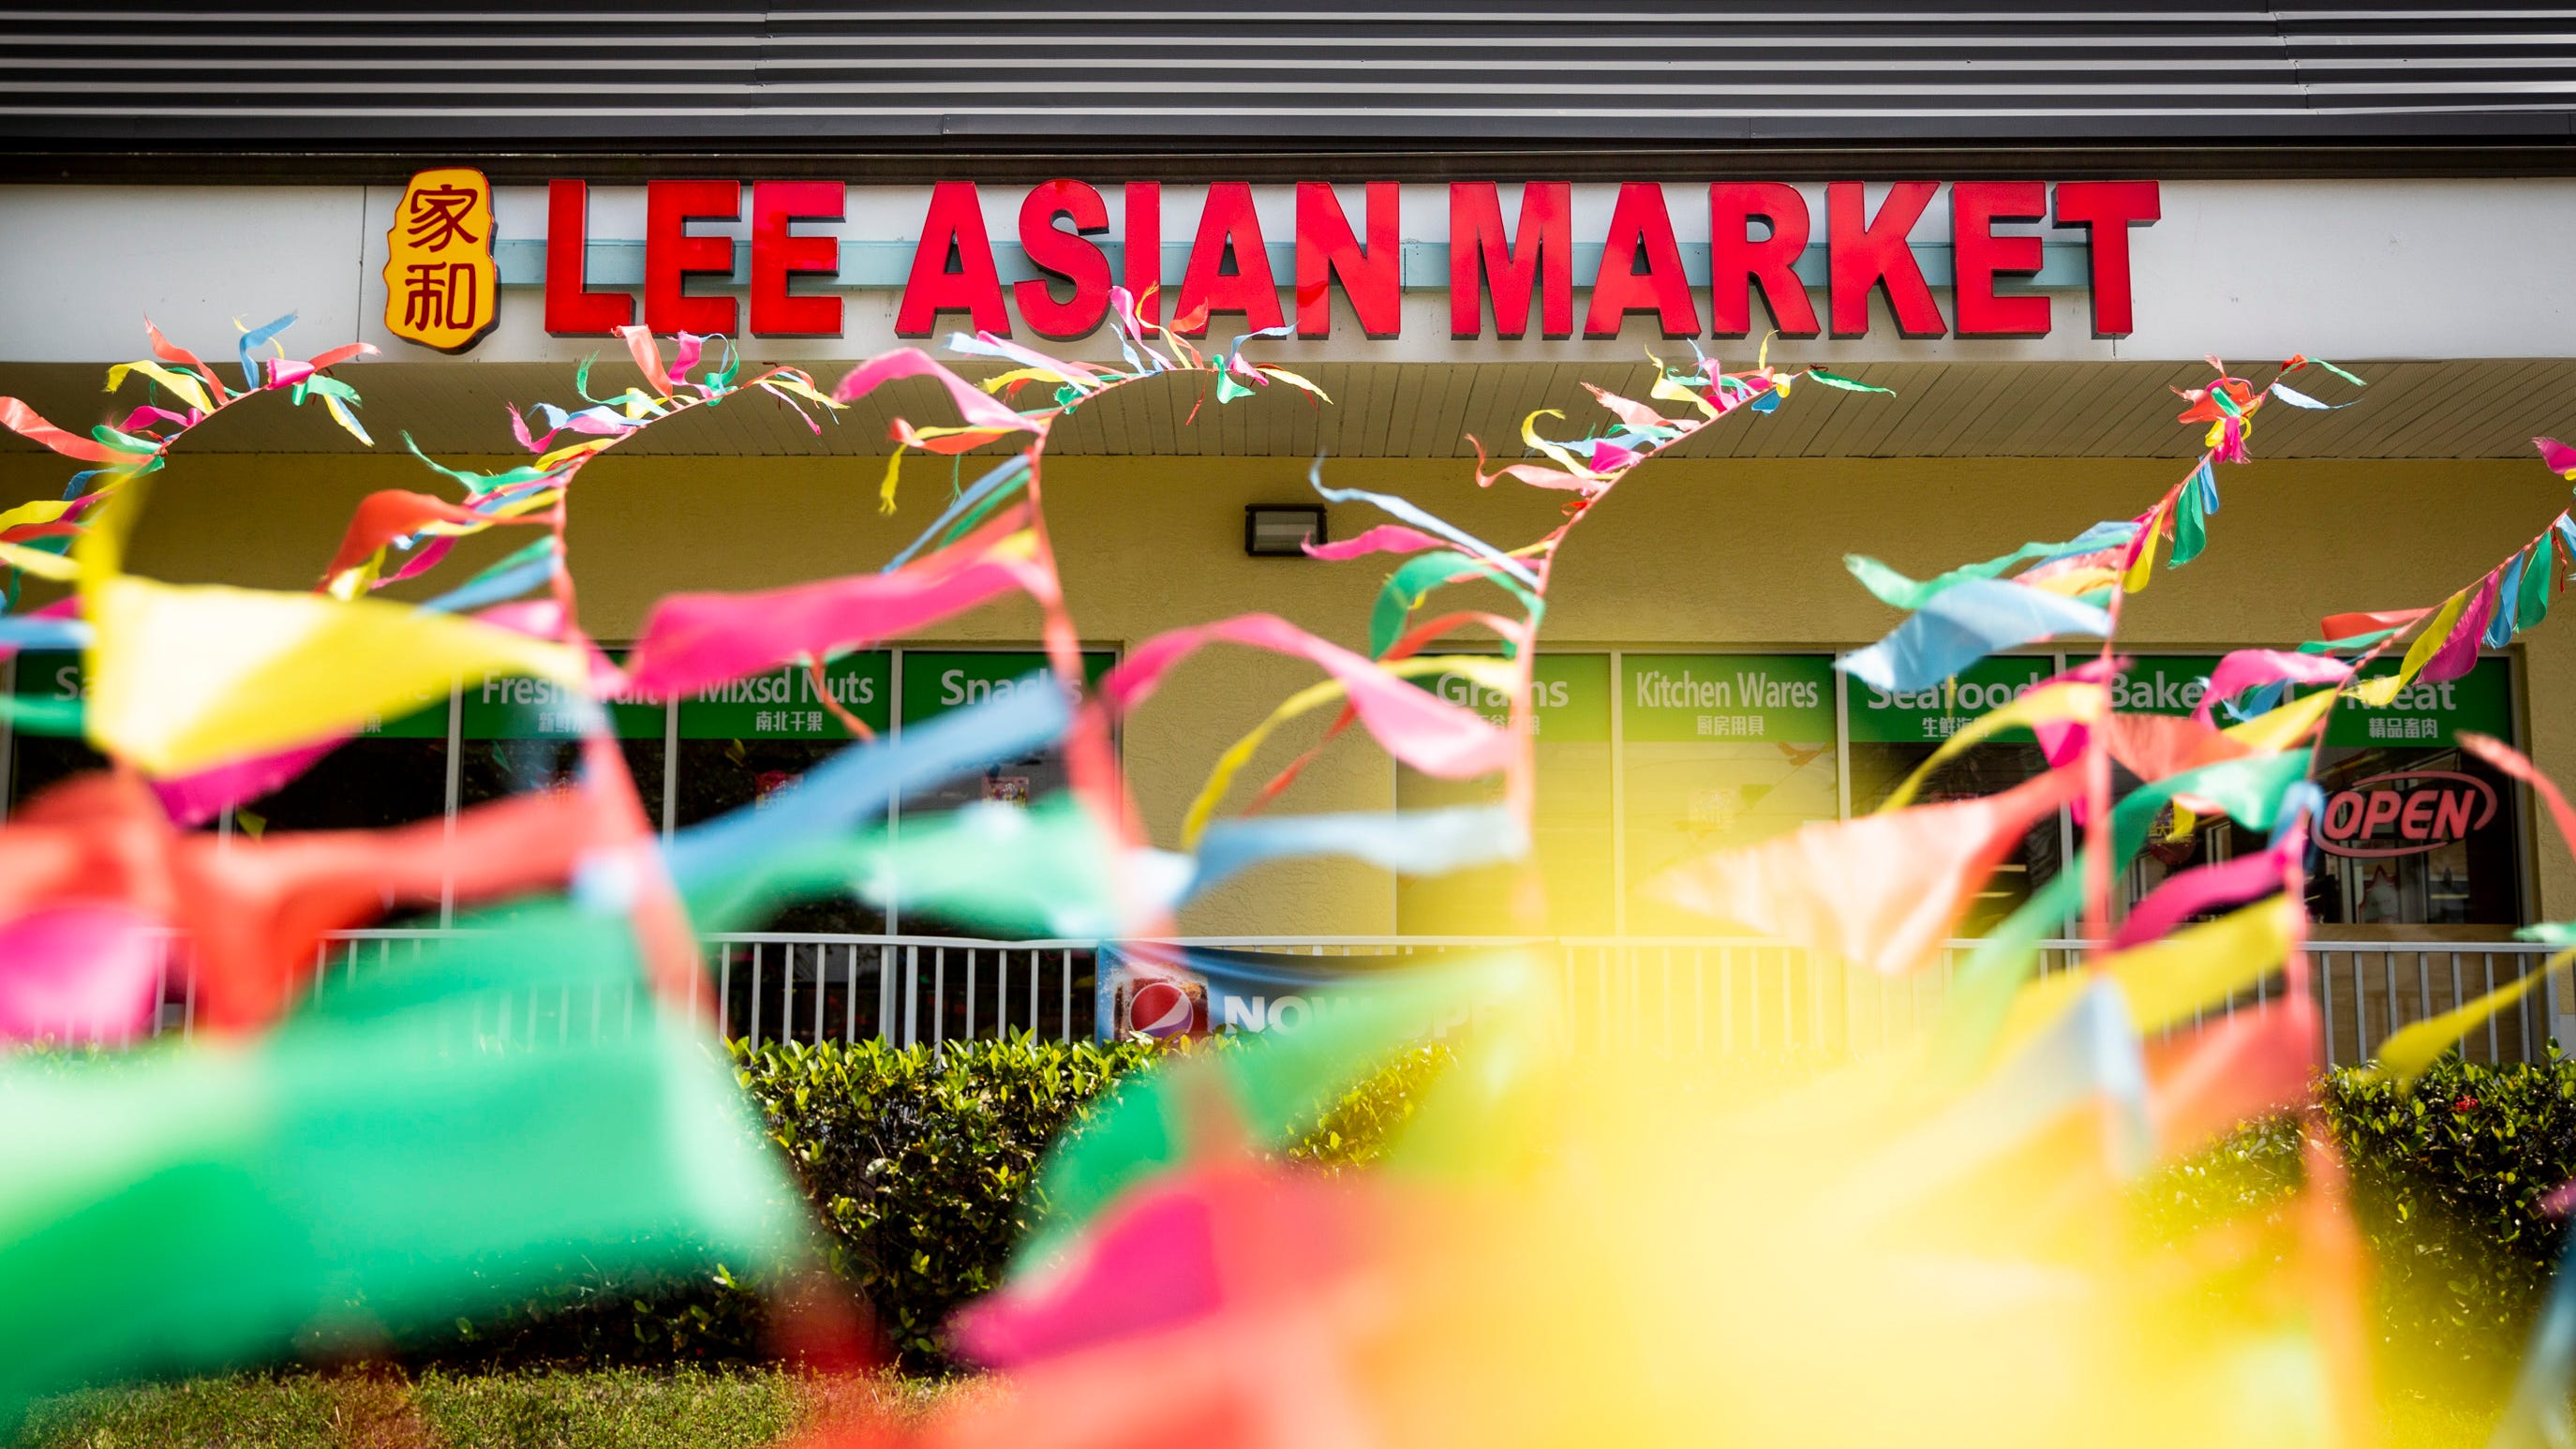 Lee Asian Market brings more grocery options to Naples shoppers